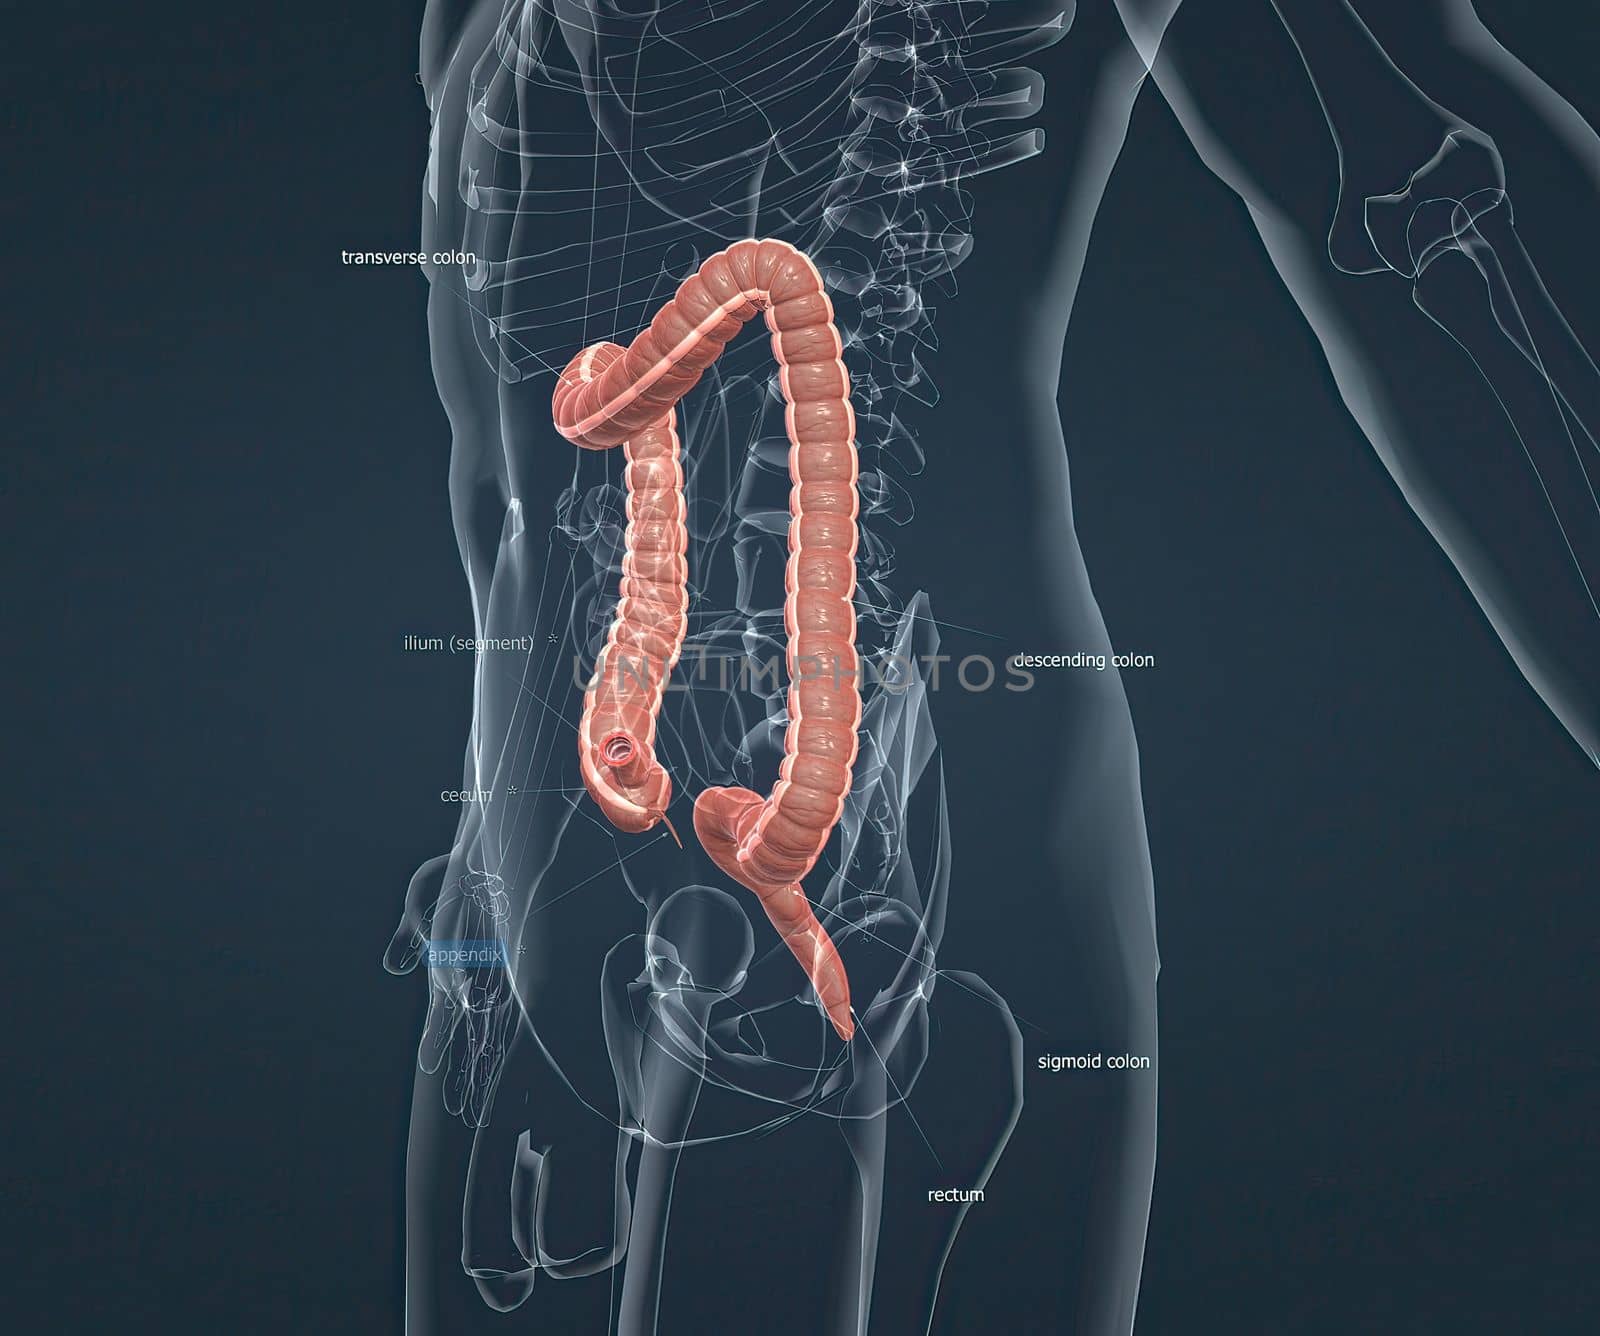 Appendicitis is inflammation of the appendix, a finger-shaped sac protruding from your colon on the lower right side of your abdomen. Appendicitis causes pain in the lower right abdomen. 3d illustration